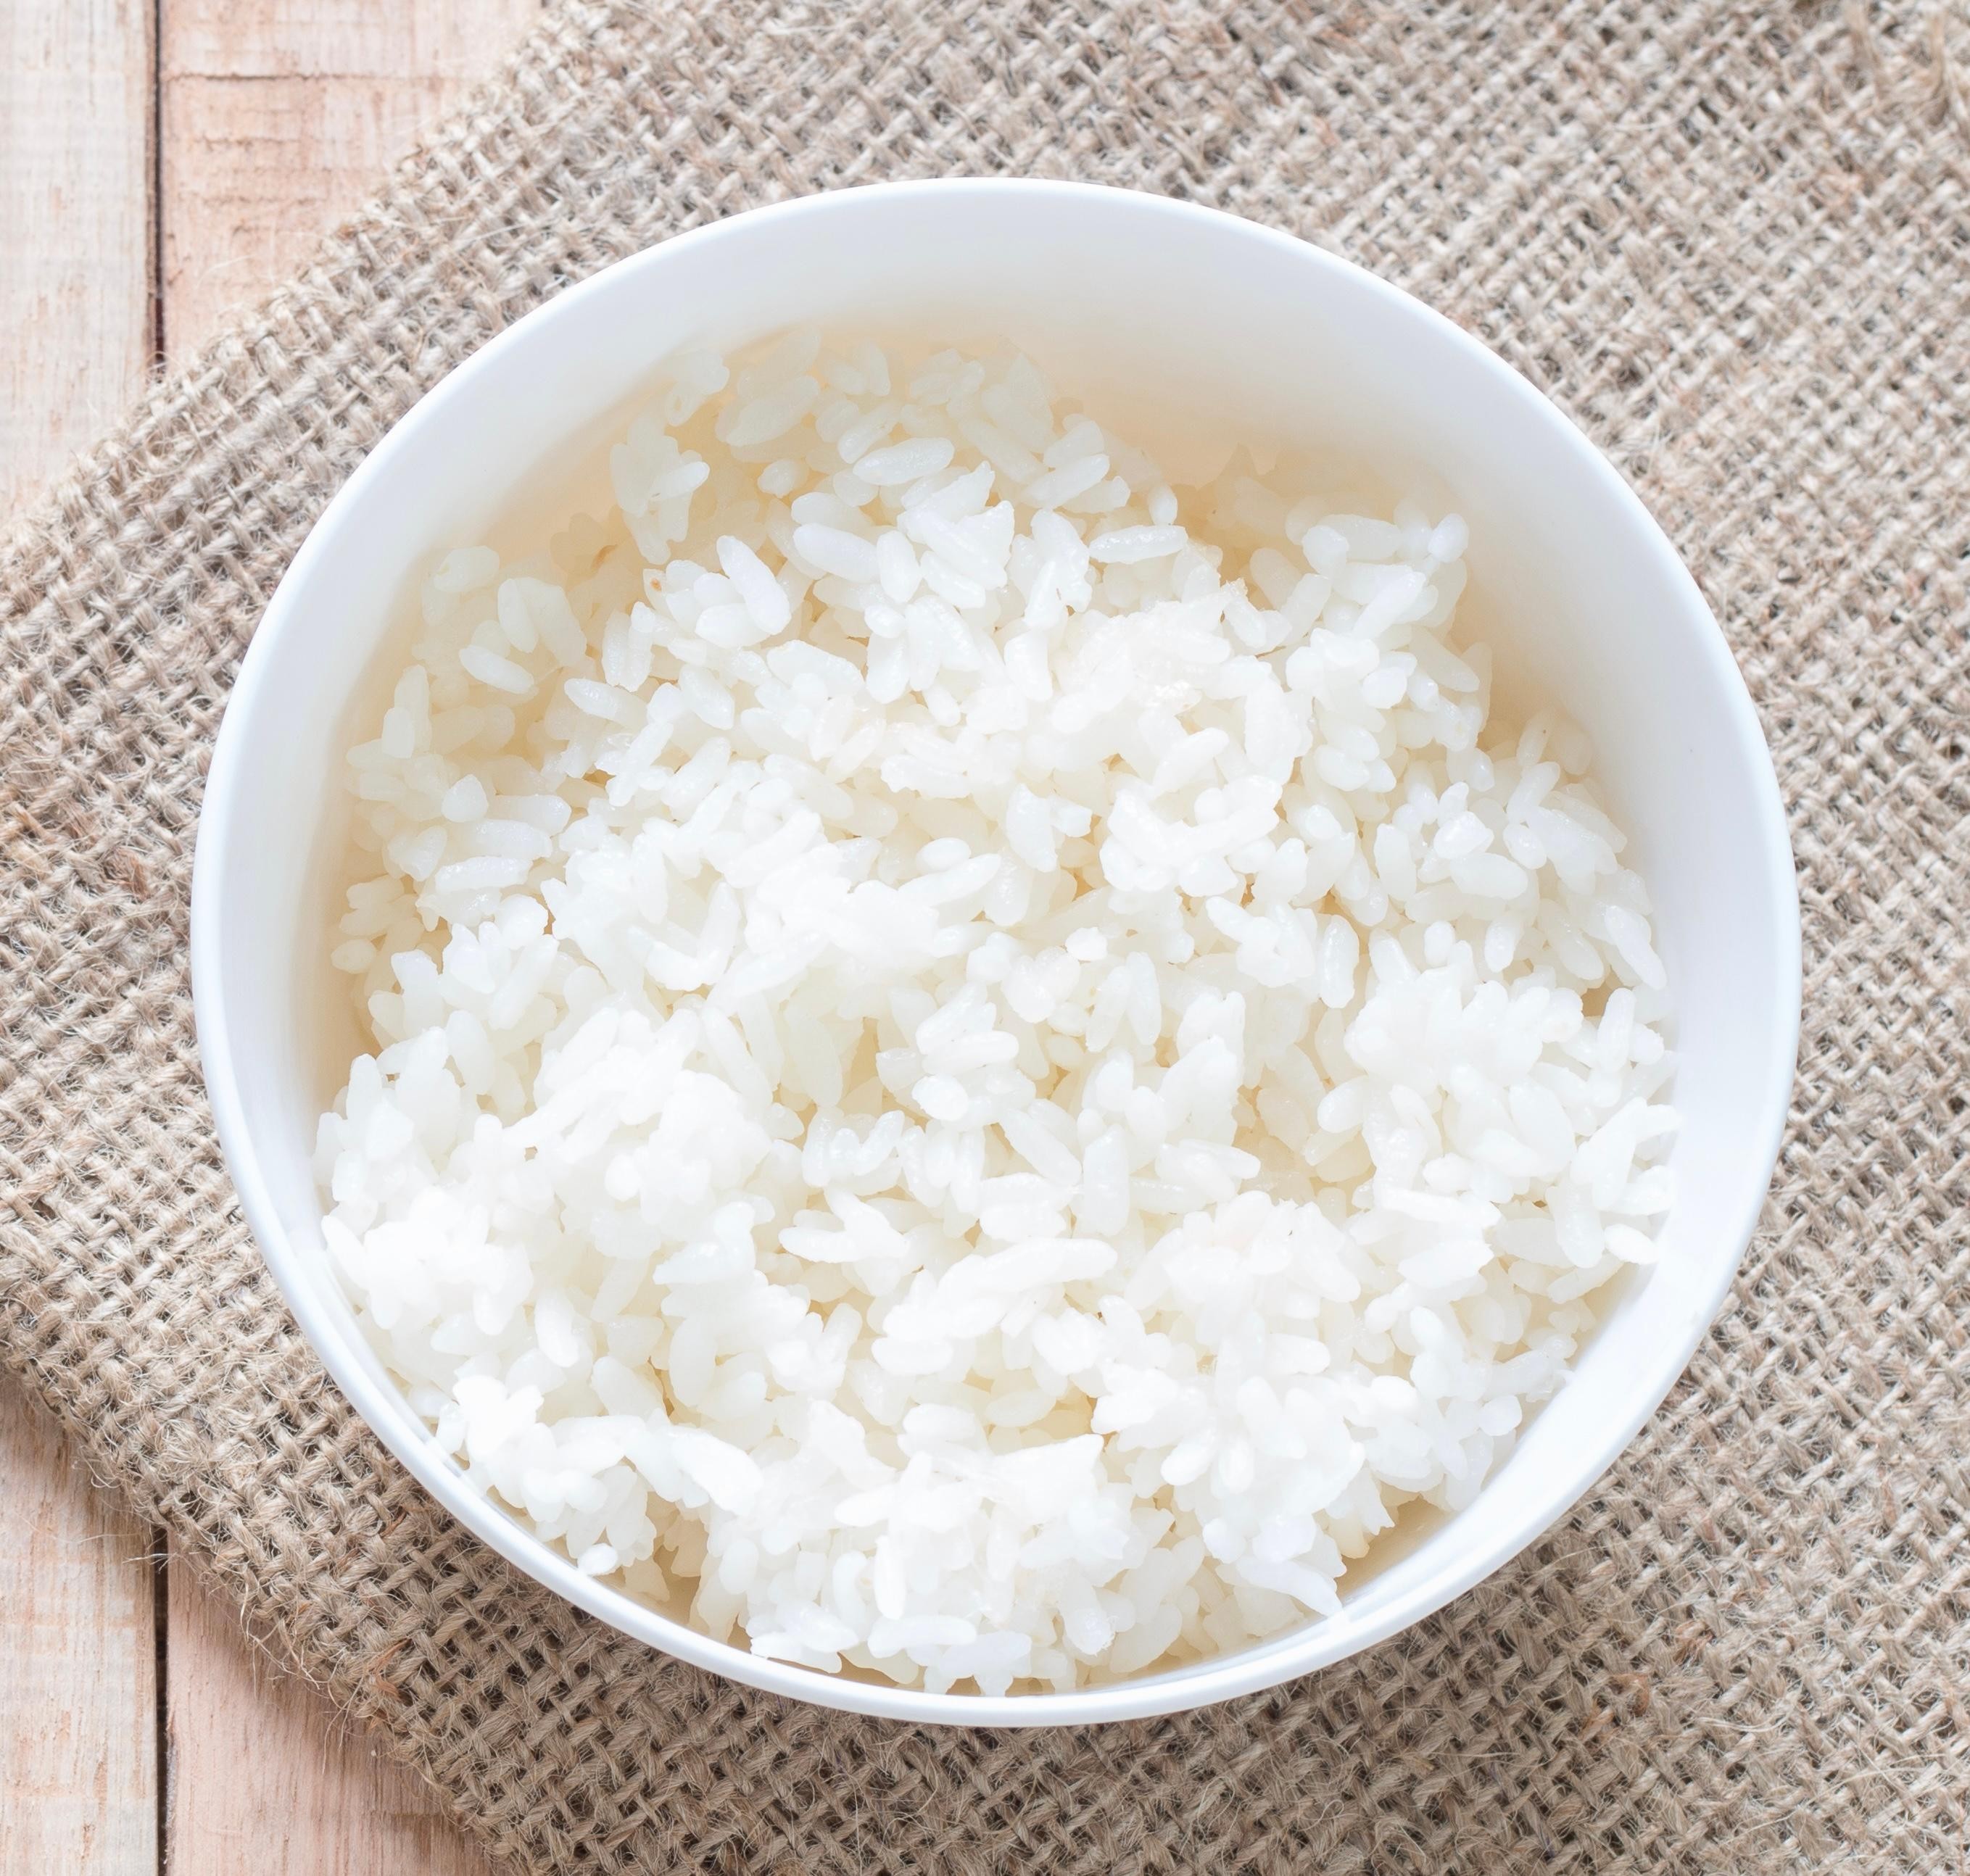 Small side of White Rice